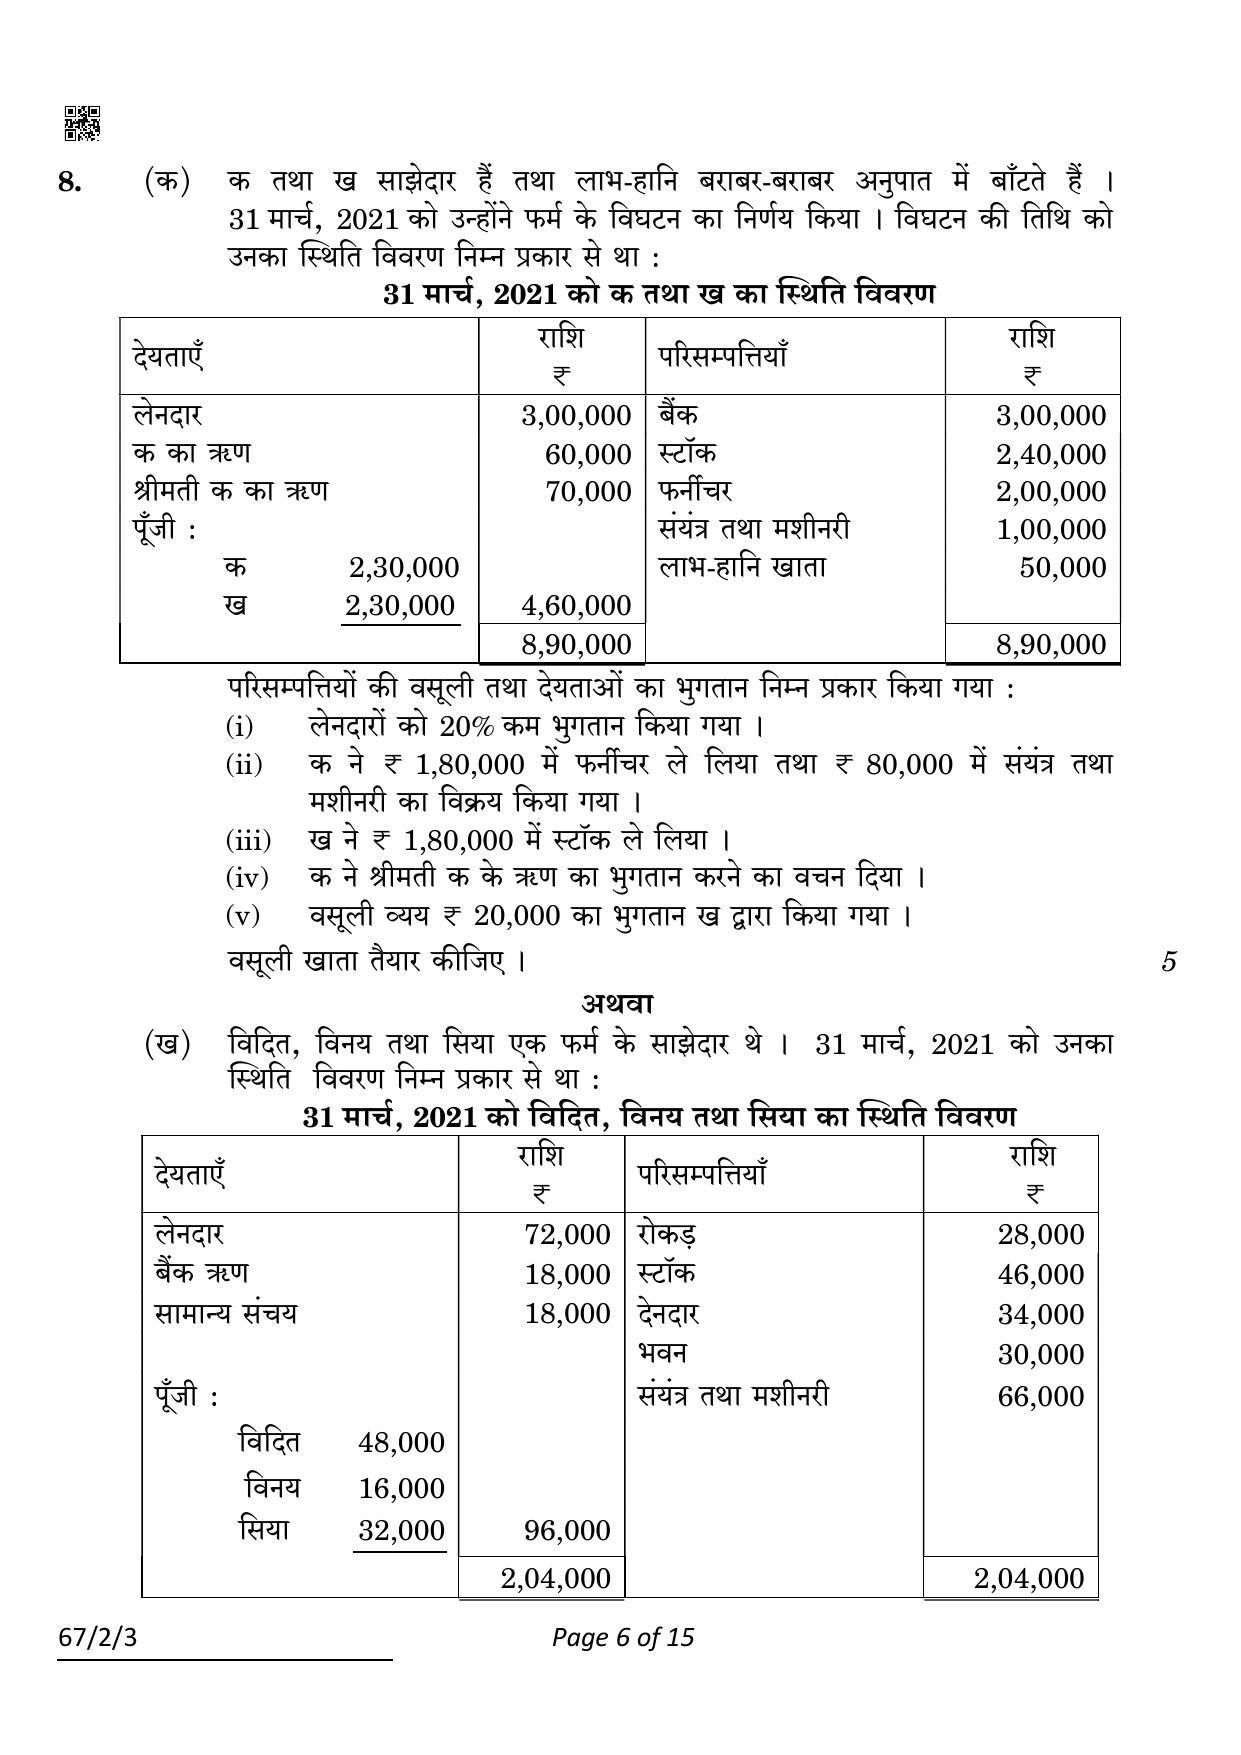 CBSE Class 12 67-2-3 Accountancy 2022 Question Paper - Page 6